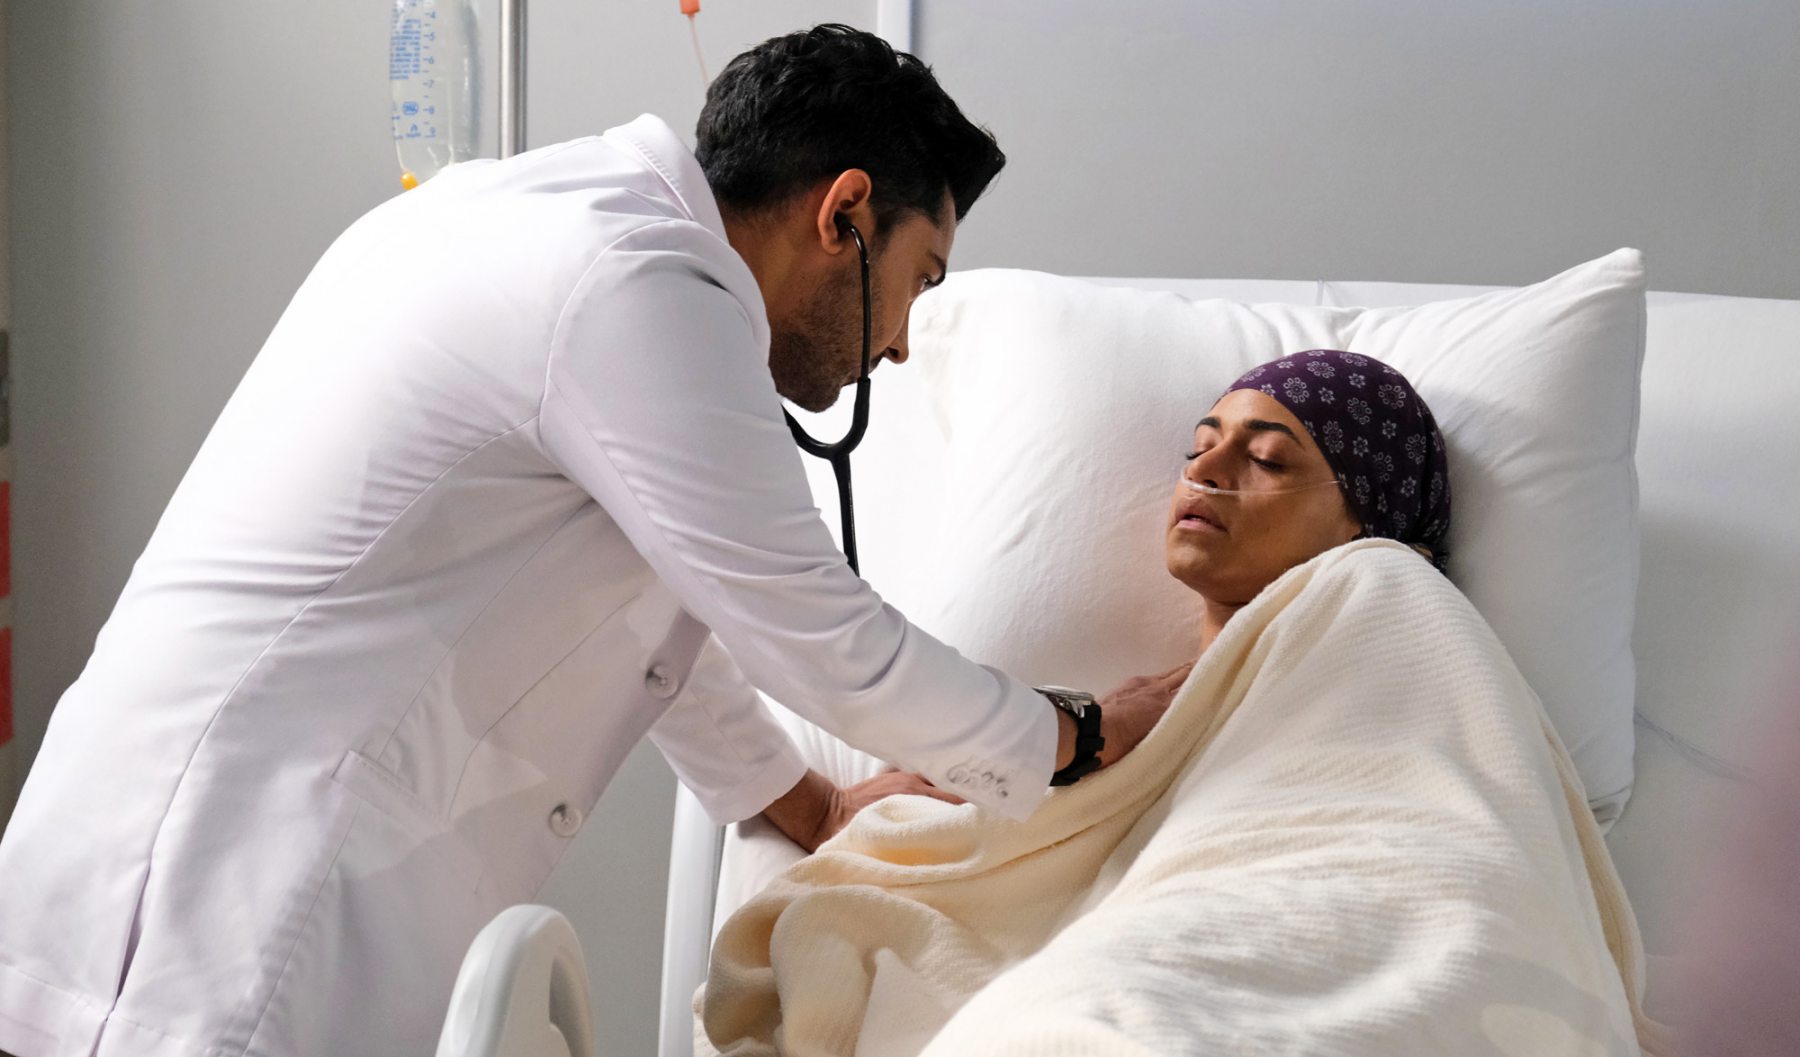 THE RESIDENT: L-R: Manish Dayal and guest star Cara Ricketts in the "Hope in the Unseen" episode of THE RESIDENT airing Tuesday, May 4 (8:00-9:01 PM ET/PT) on FOX. ©2021 Fox Media LLC Cr: Guy D'Alema/FOX